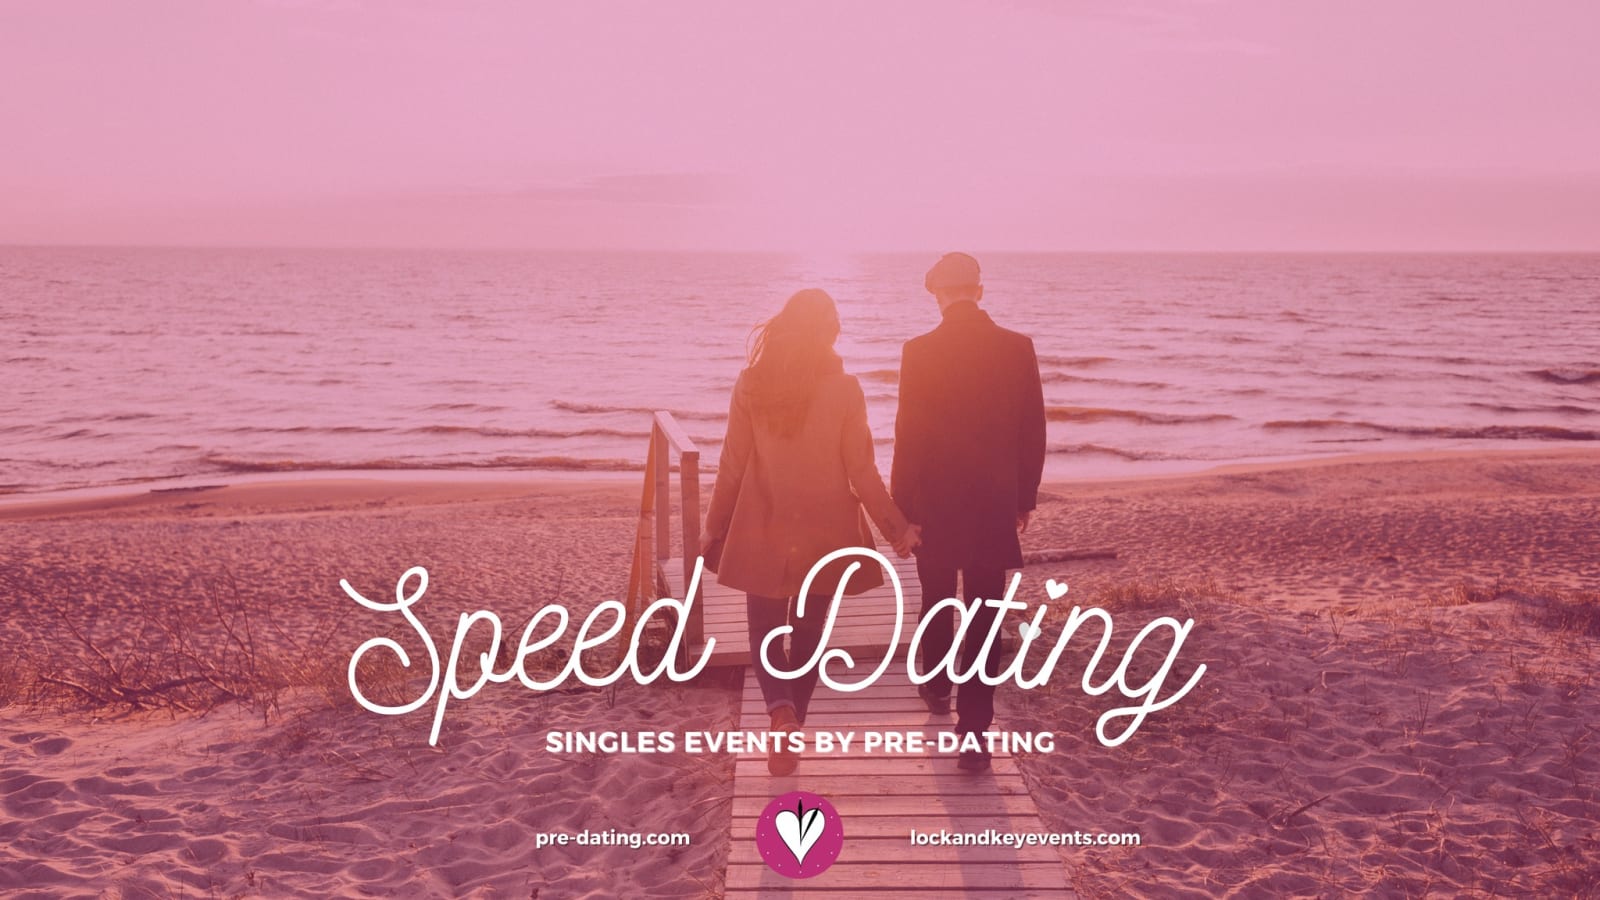 Atlanta Speed Dating Ages 21-36